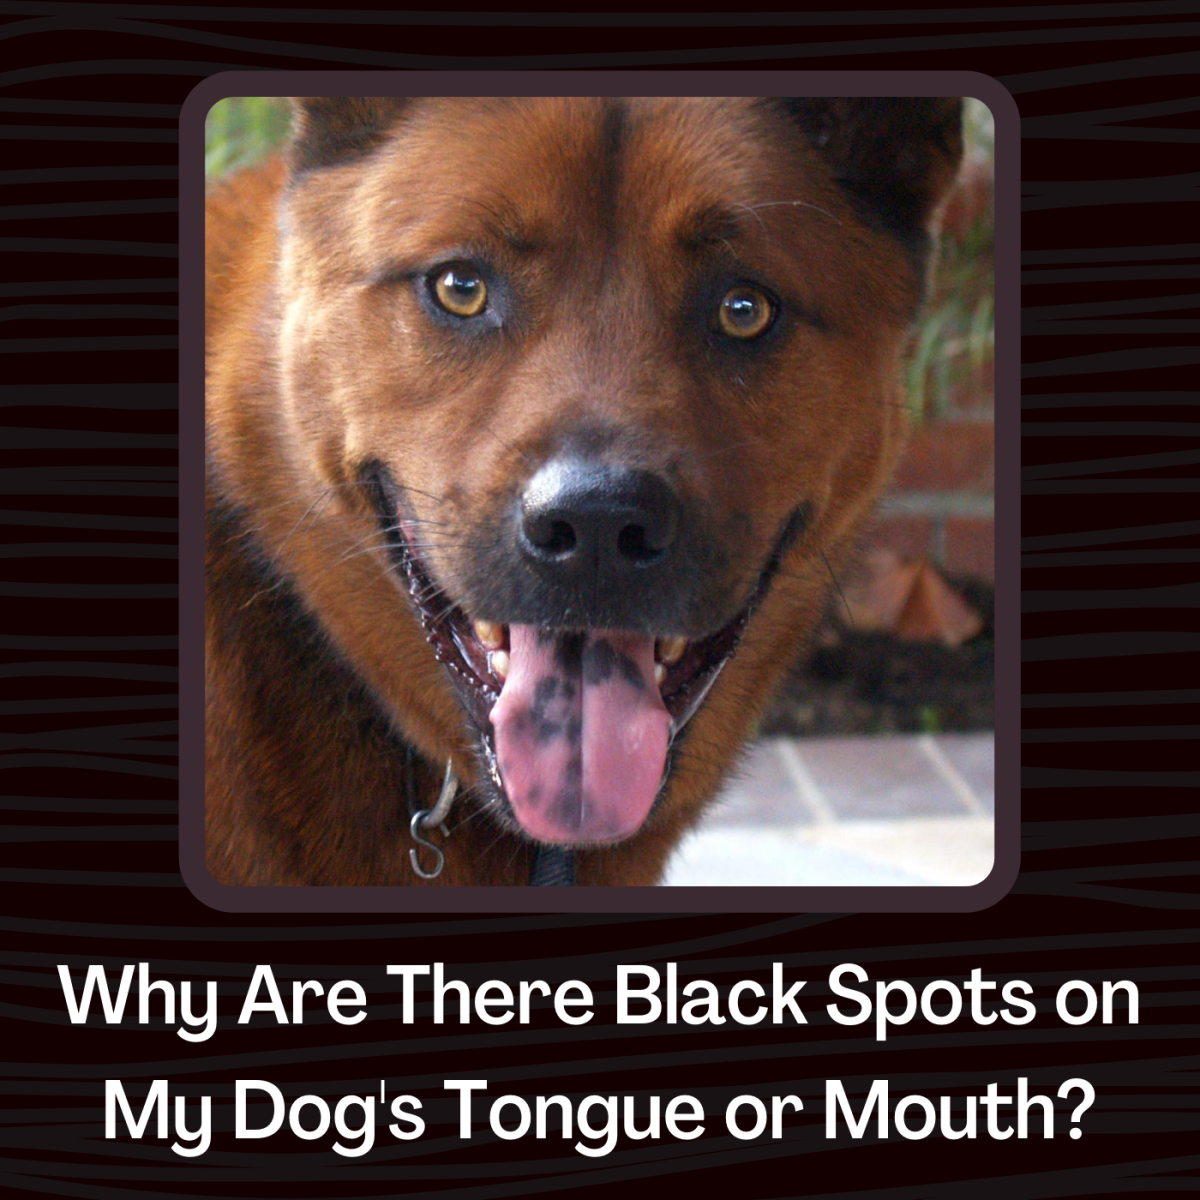 If your dog has black coloring on their mouth or tongue, there are several possible explanations.